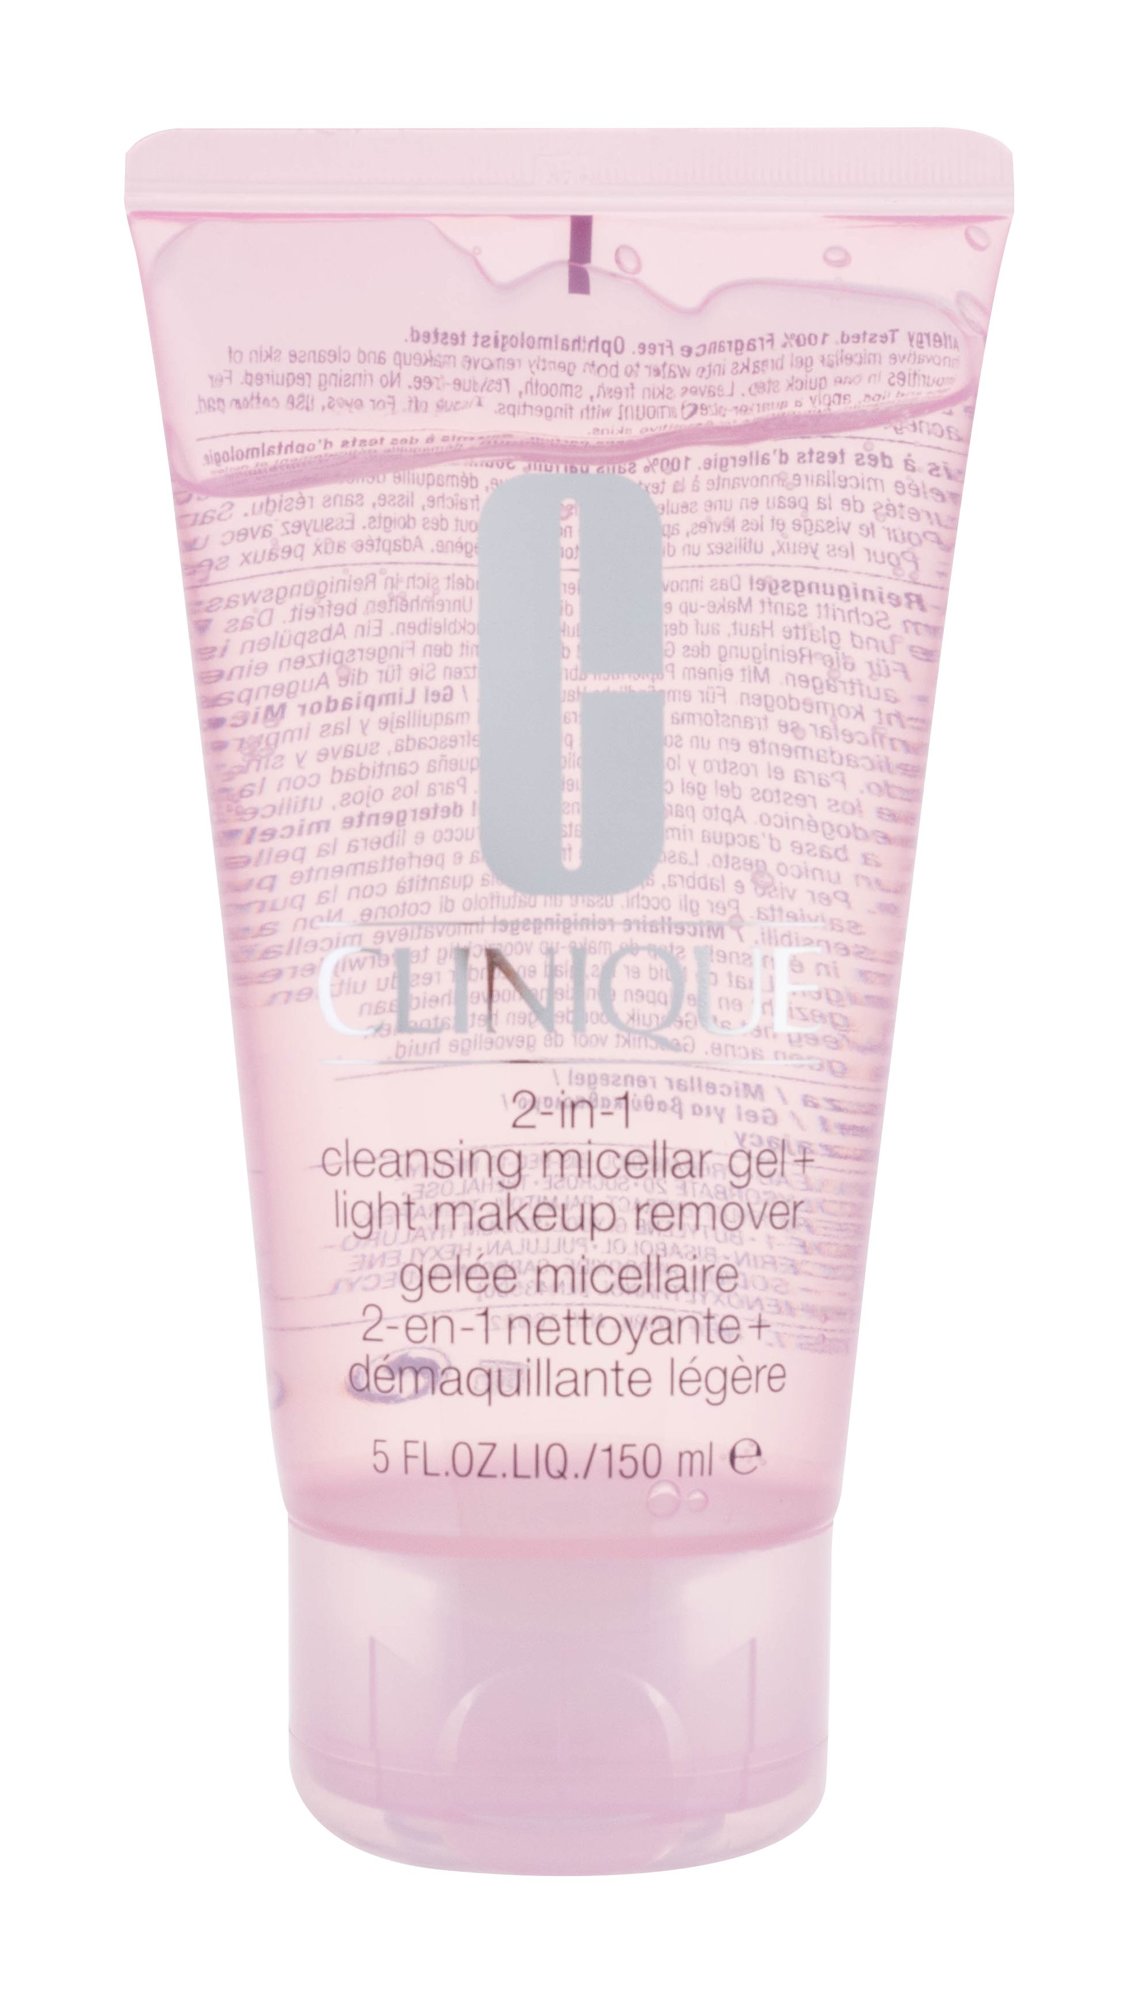 Clinique 2in1 Cleansing Micellar Gel